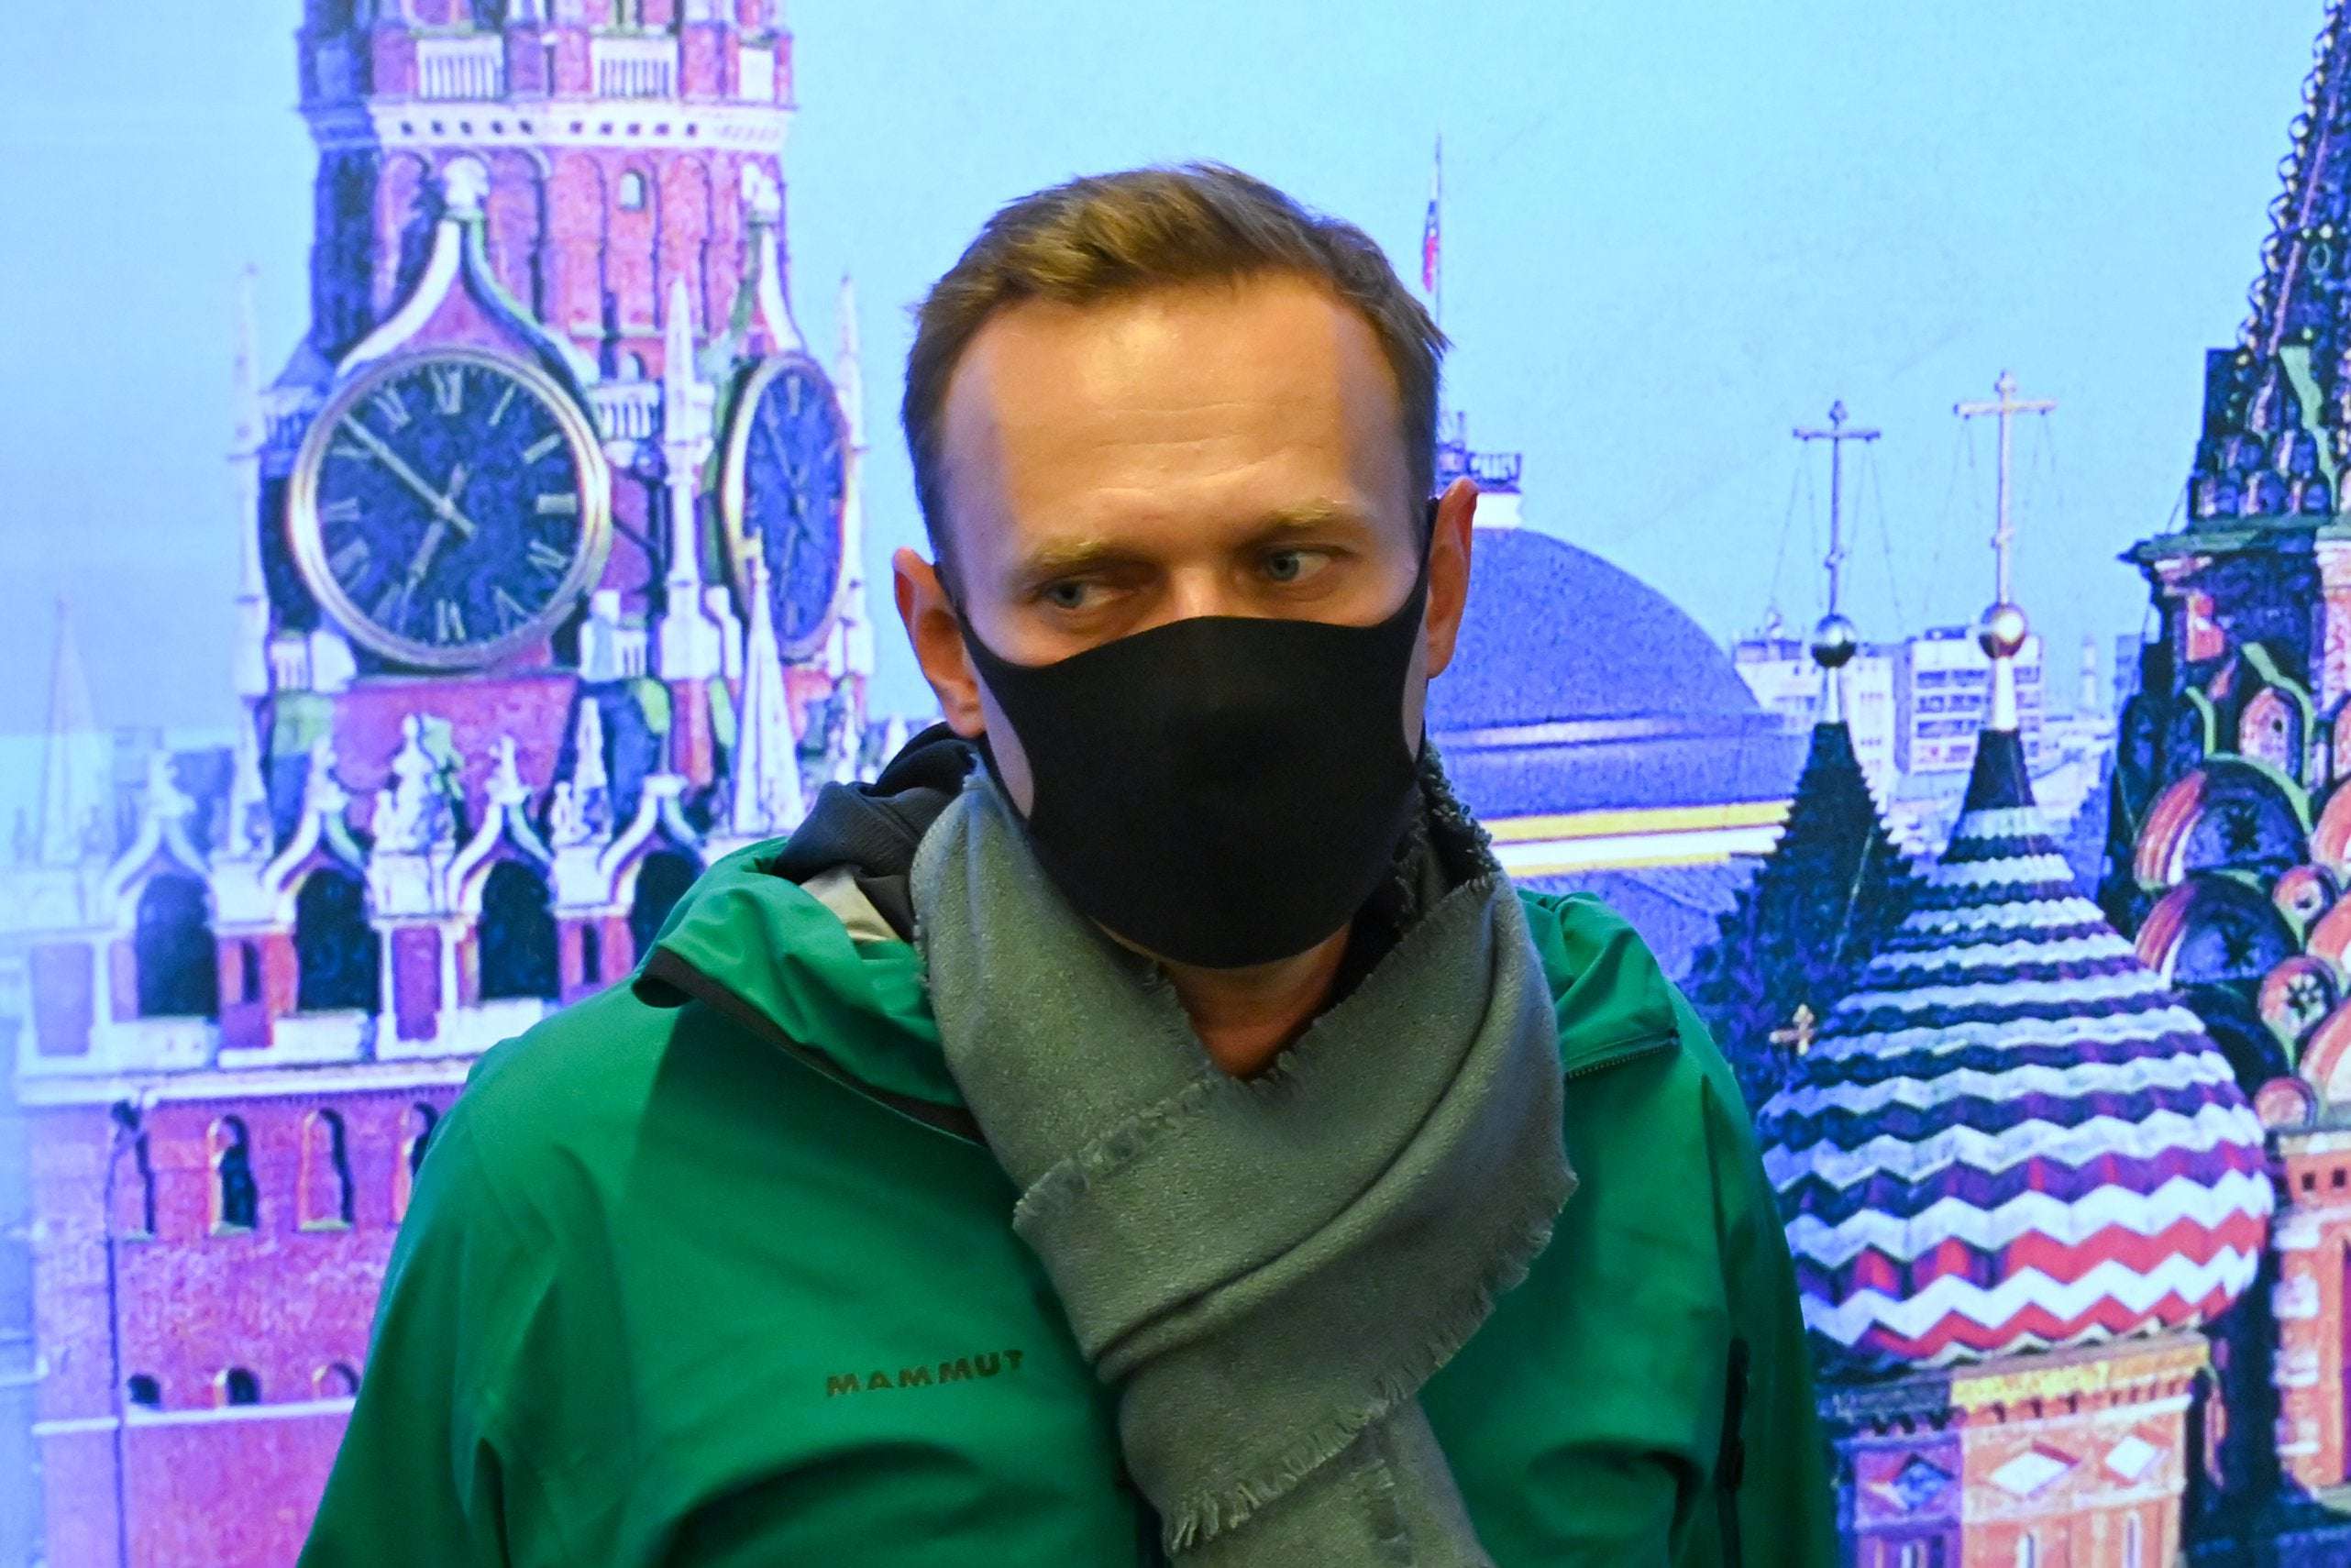 image for Alexei Navalny Overtakes Putin As Russia's Most Mentioned Politician on Social Media